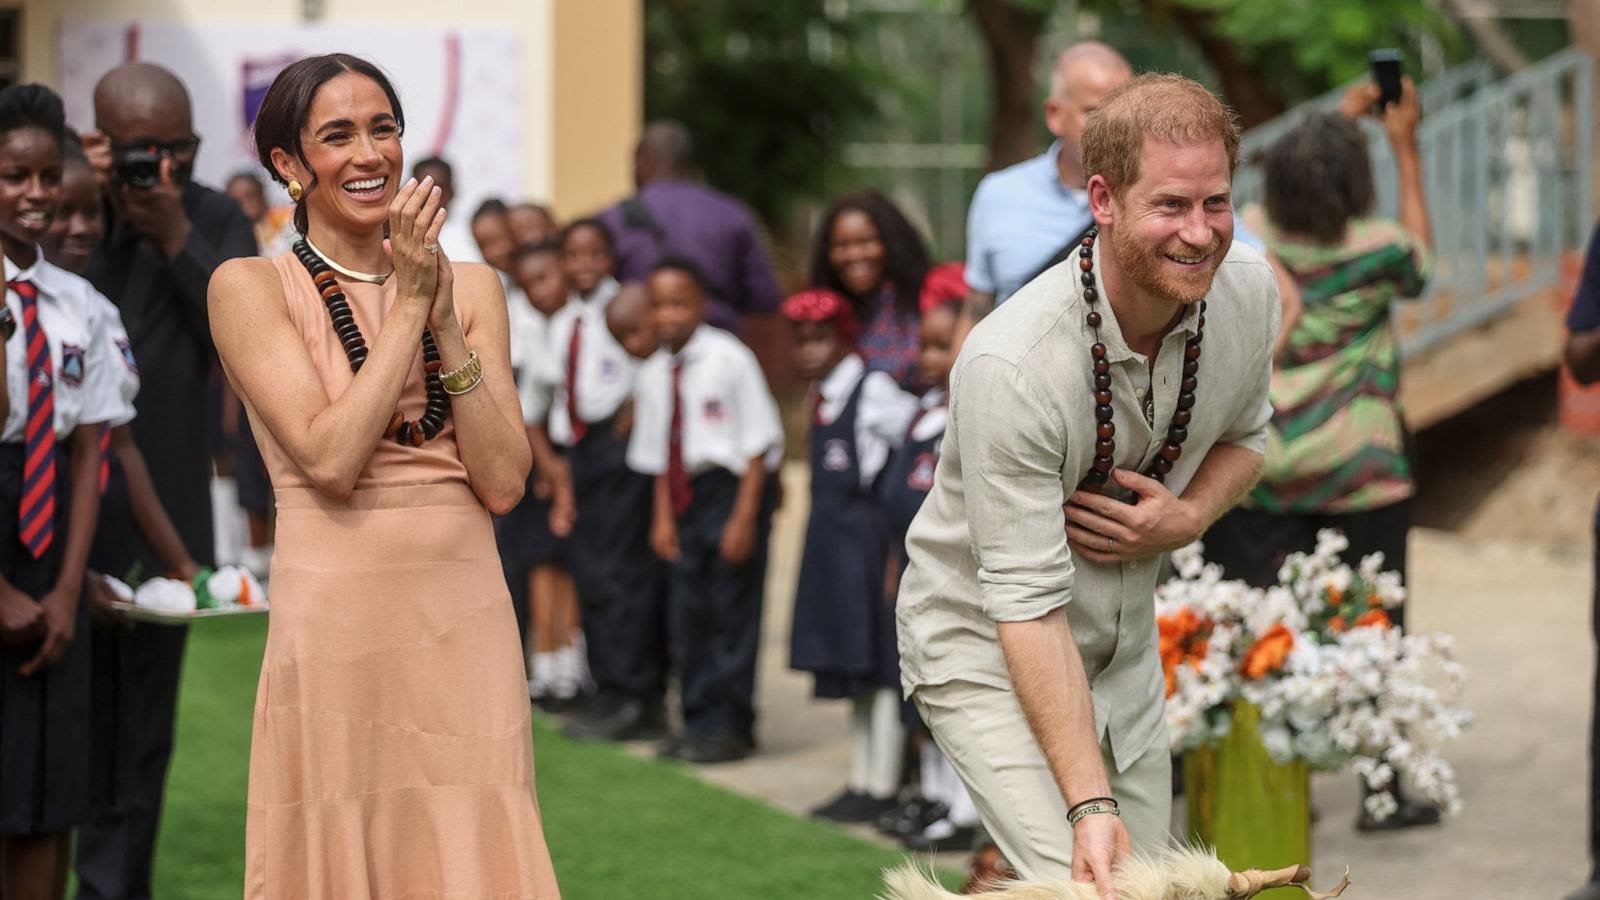 Prince Harry, Meghan Markle visit Nigeria, share mental health message with students